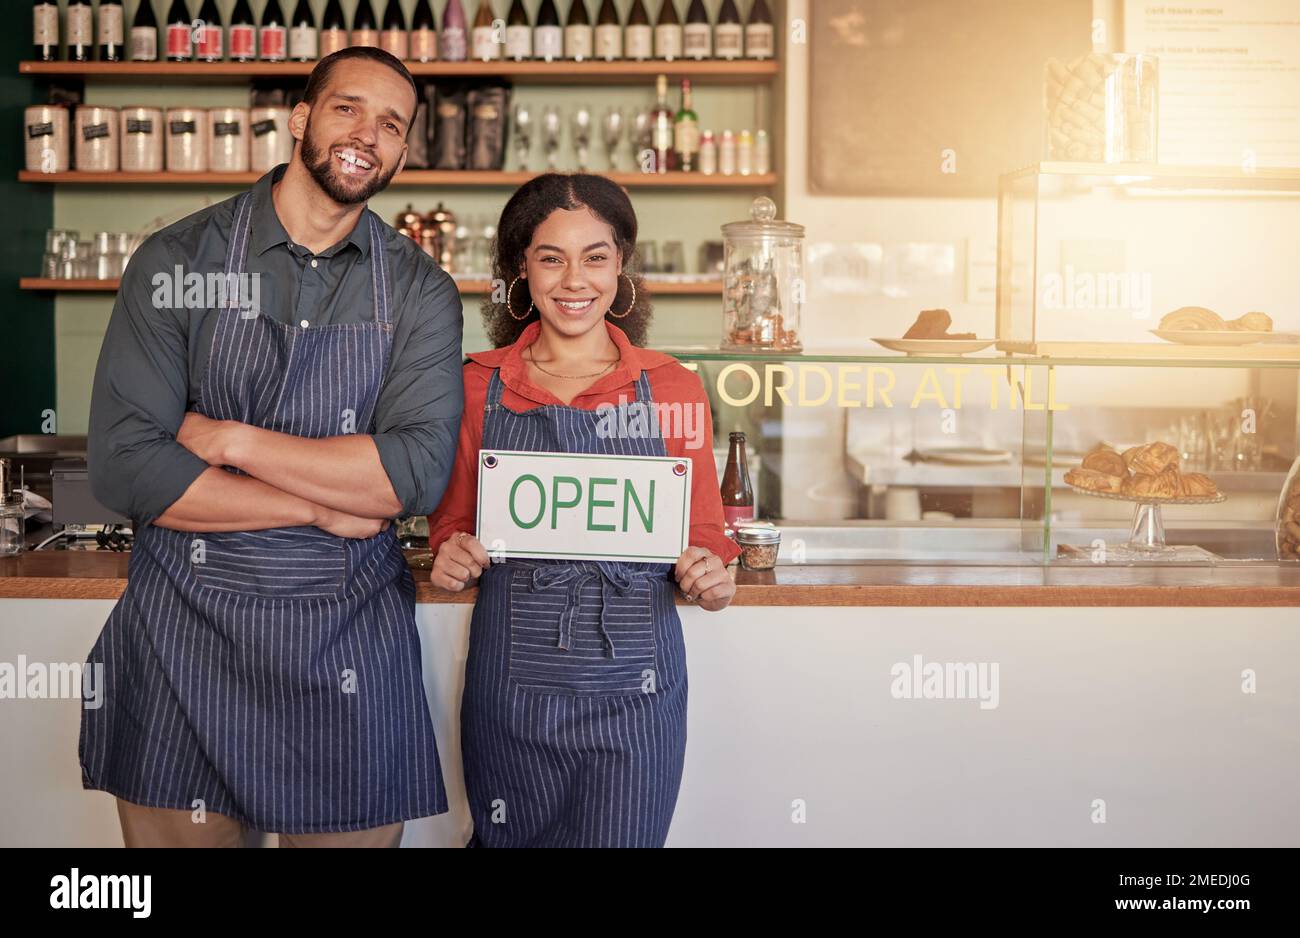 Cafe, portrait or happy couple with an open sign to welcome sales with hospitality at a coffee shop. Manager, partnership or entrepreneurs smile Stock Photo